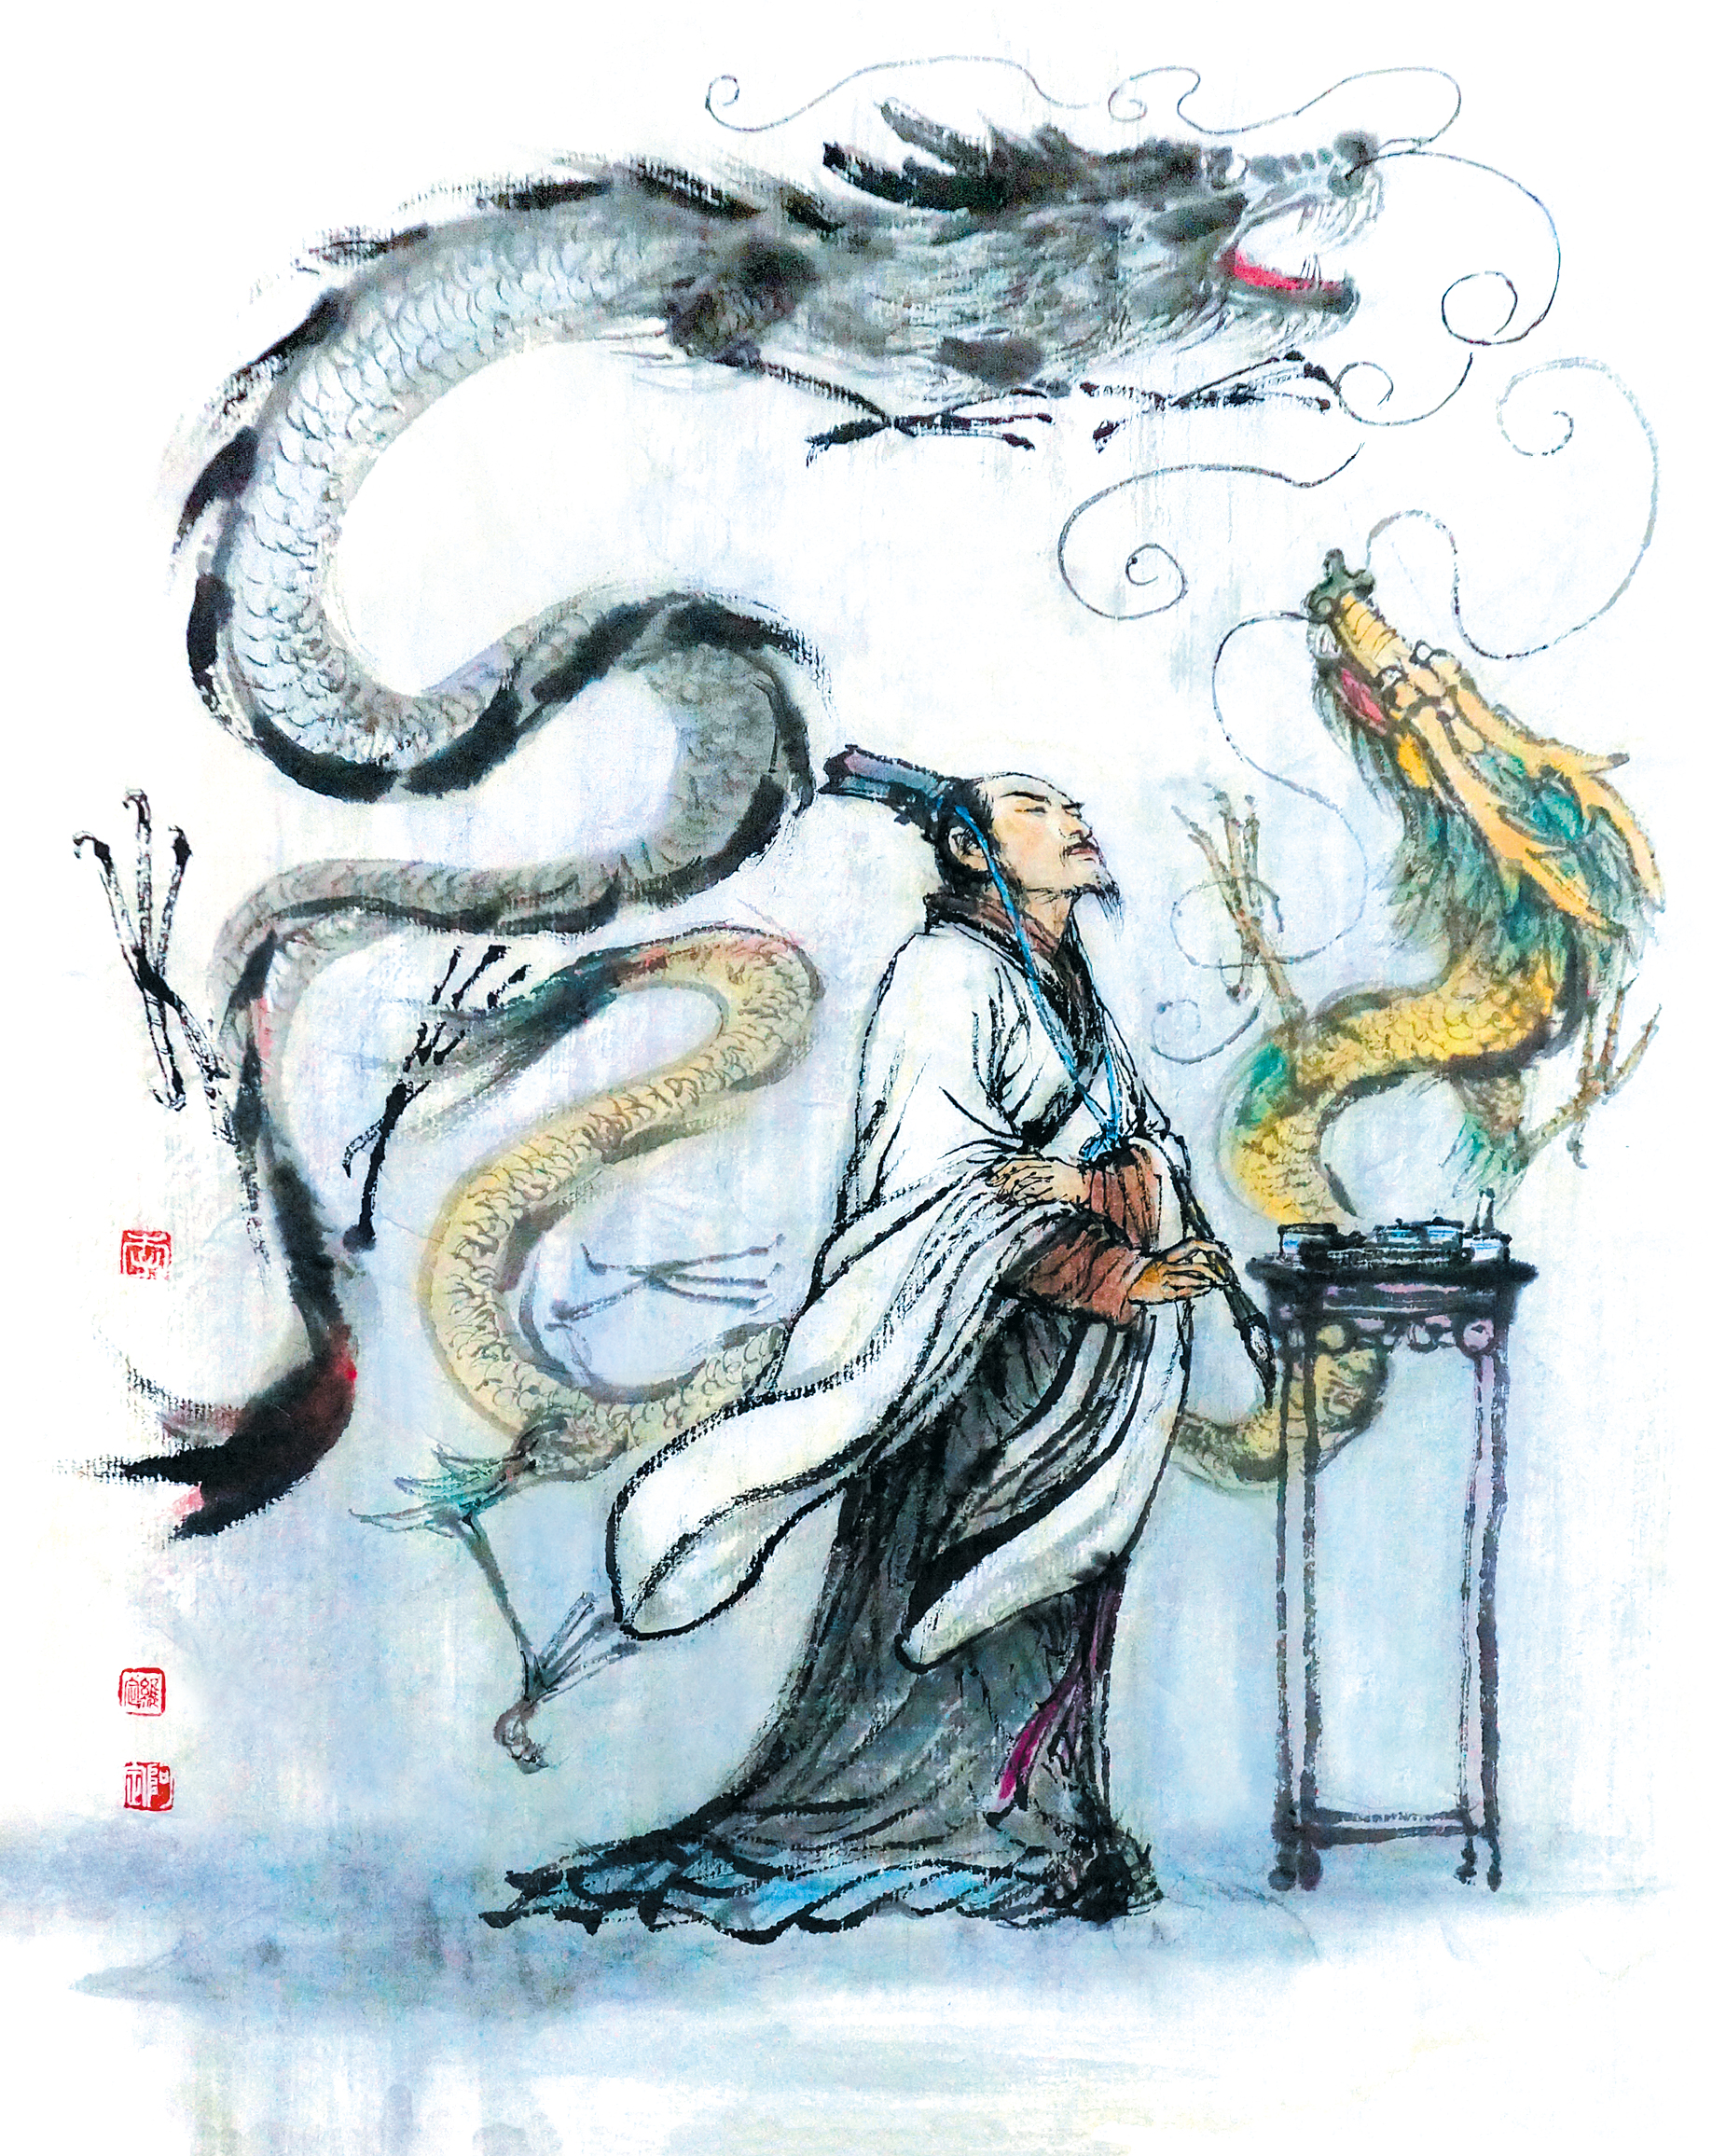 Illustration from Illustrated Stories From China